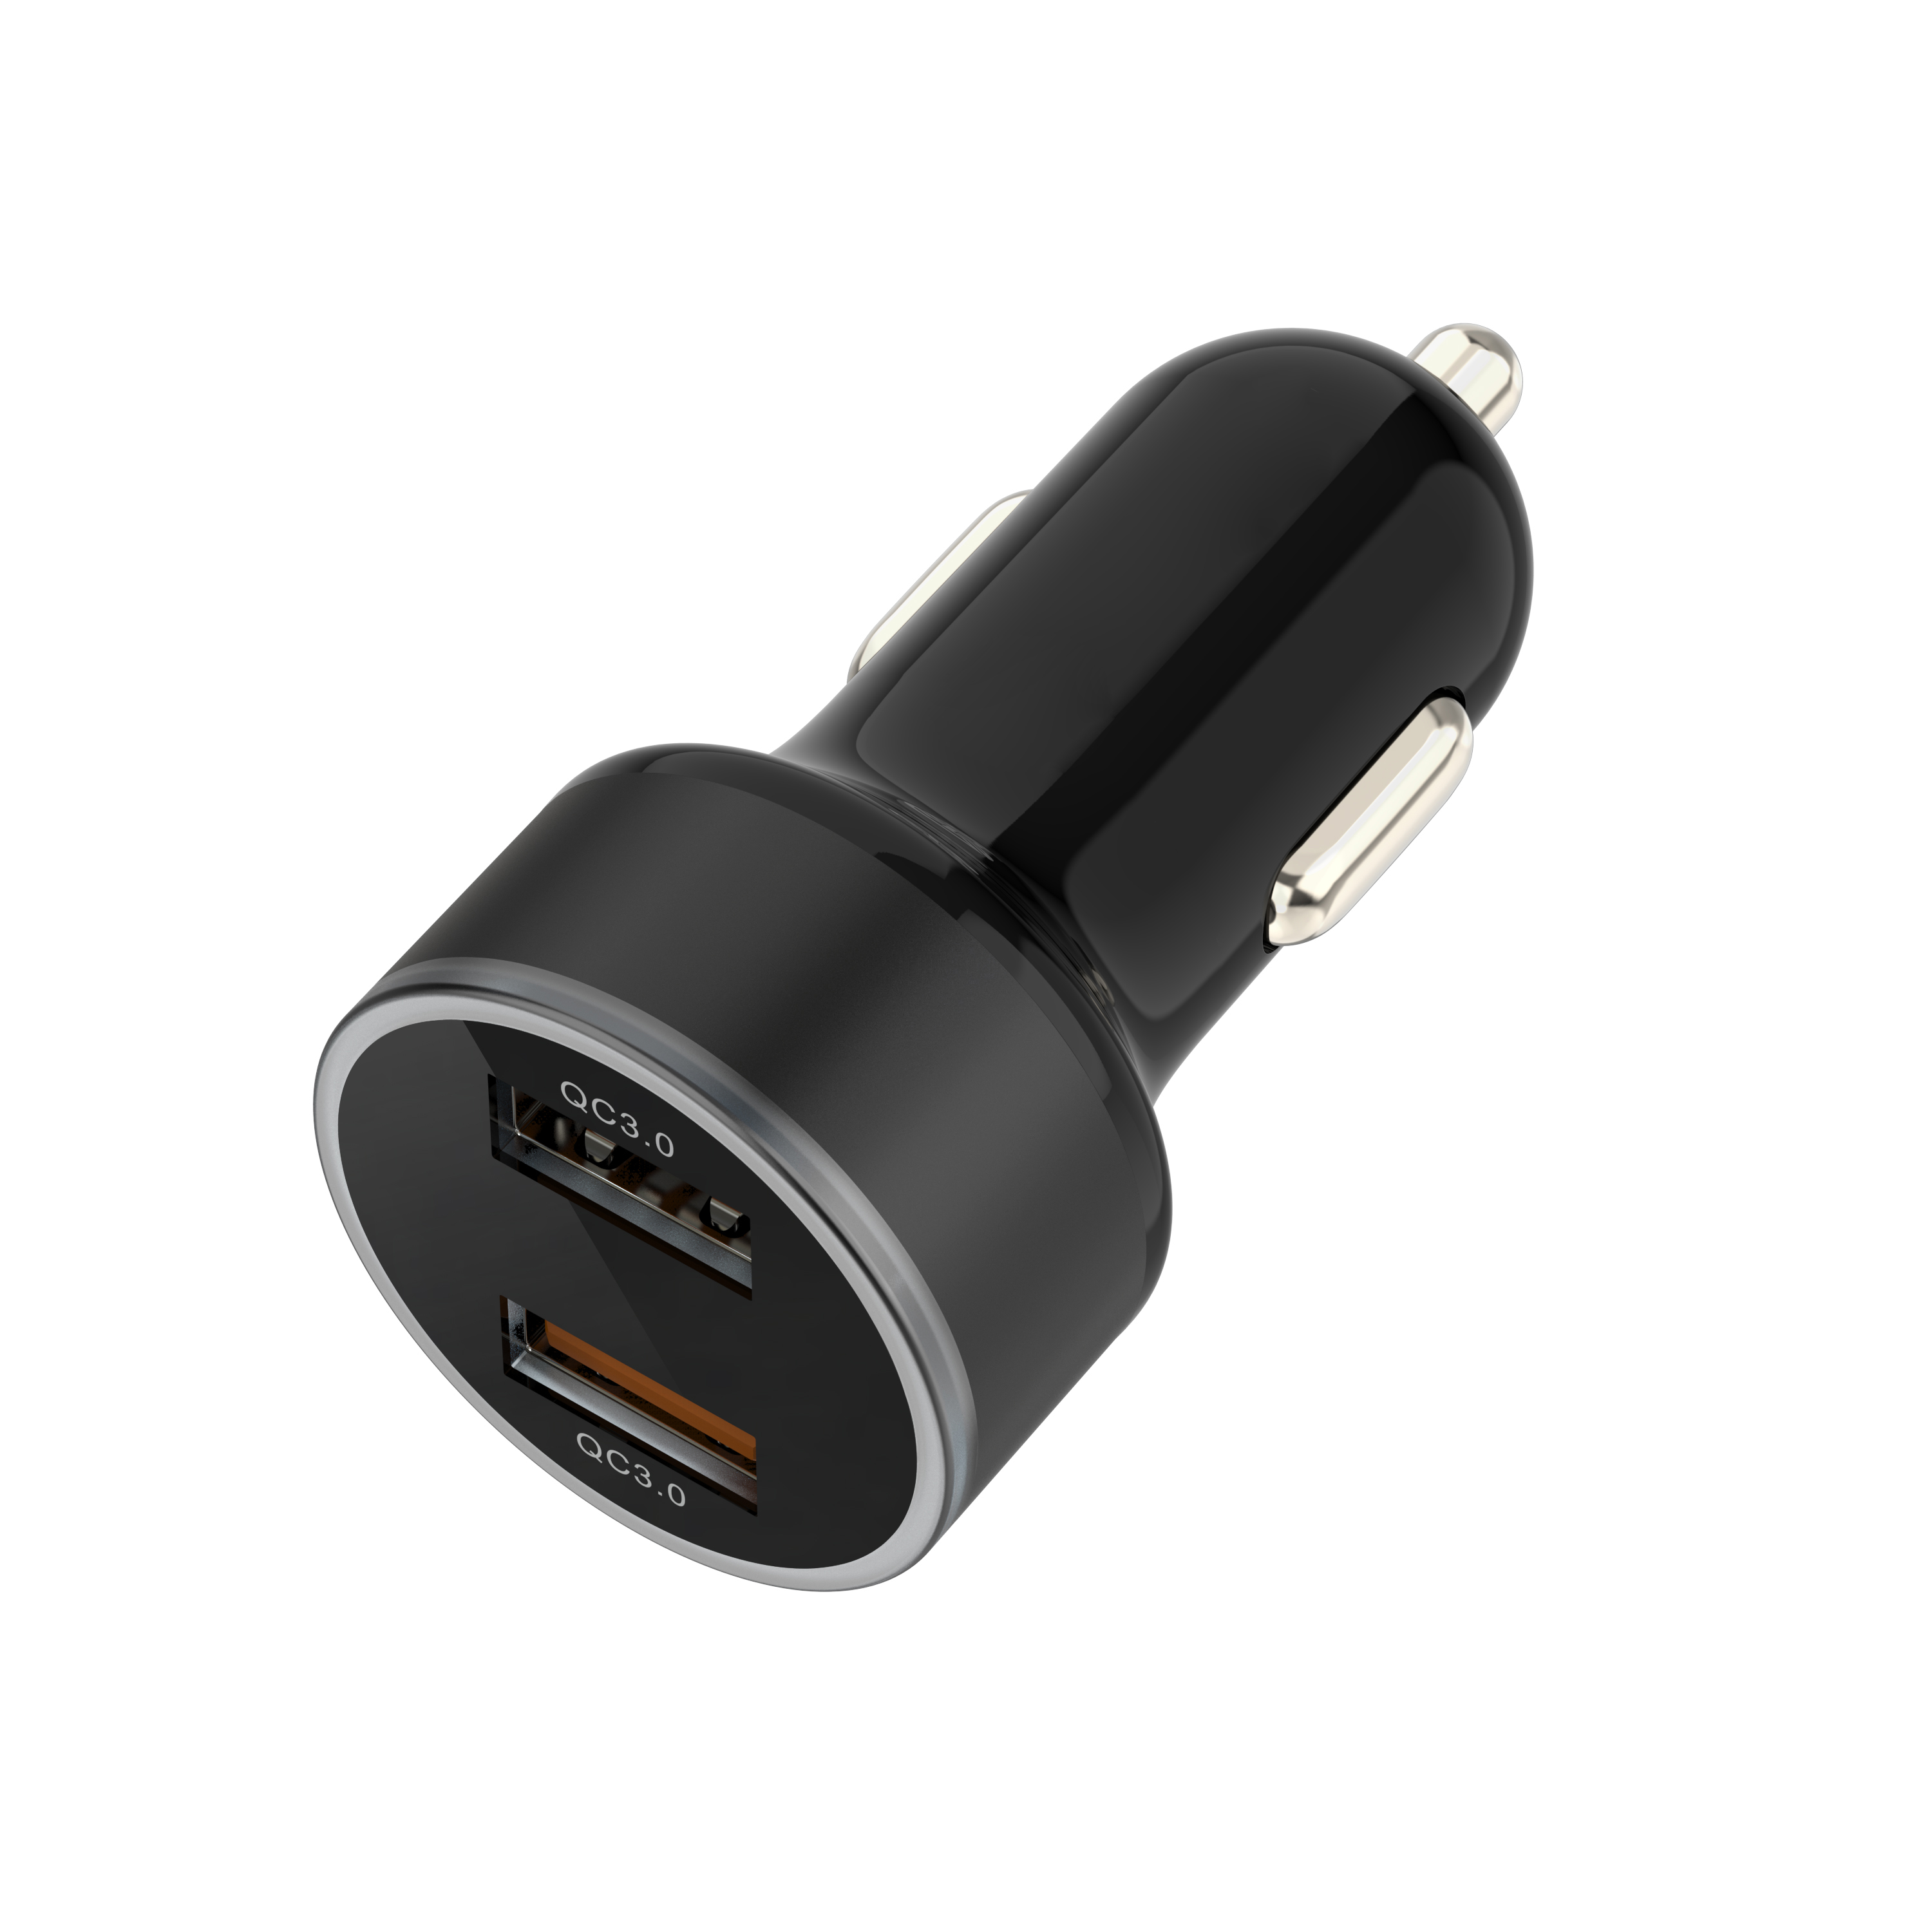 Double port QC3.0 car charger Manufacturers, Double port QC3.0 car charger Factory, Supply Double port QC3.0 car charger